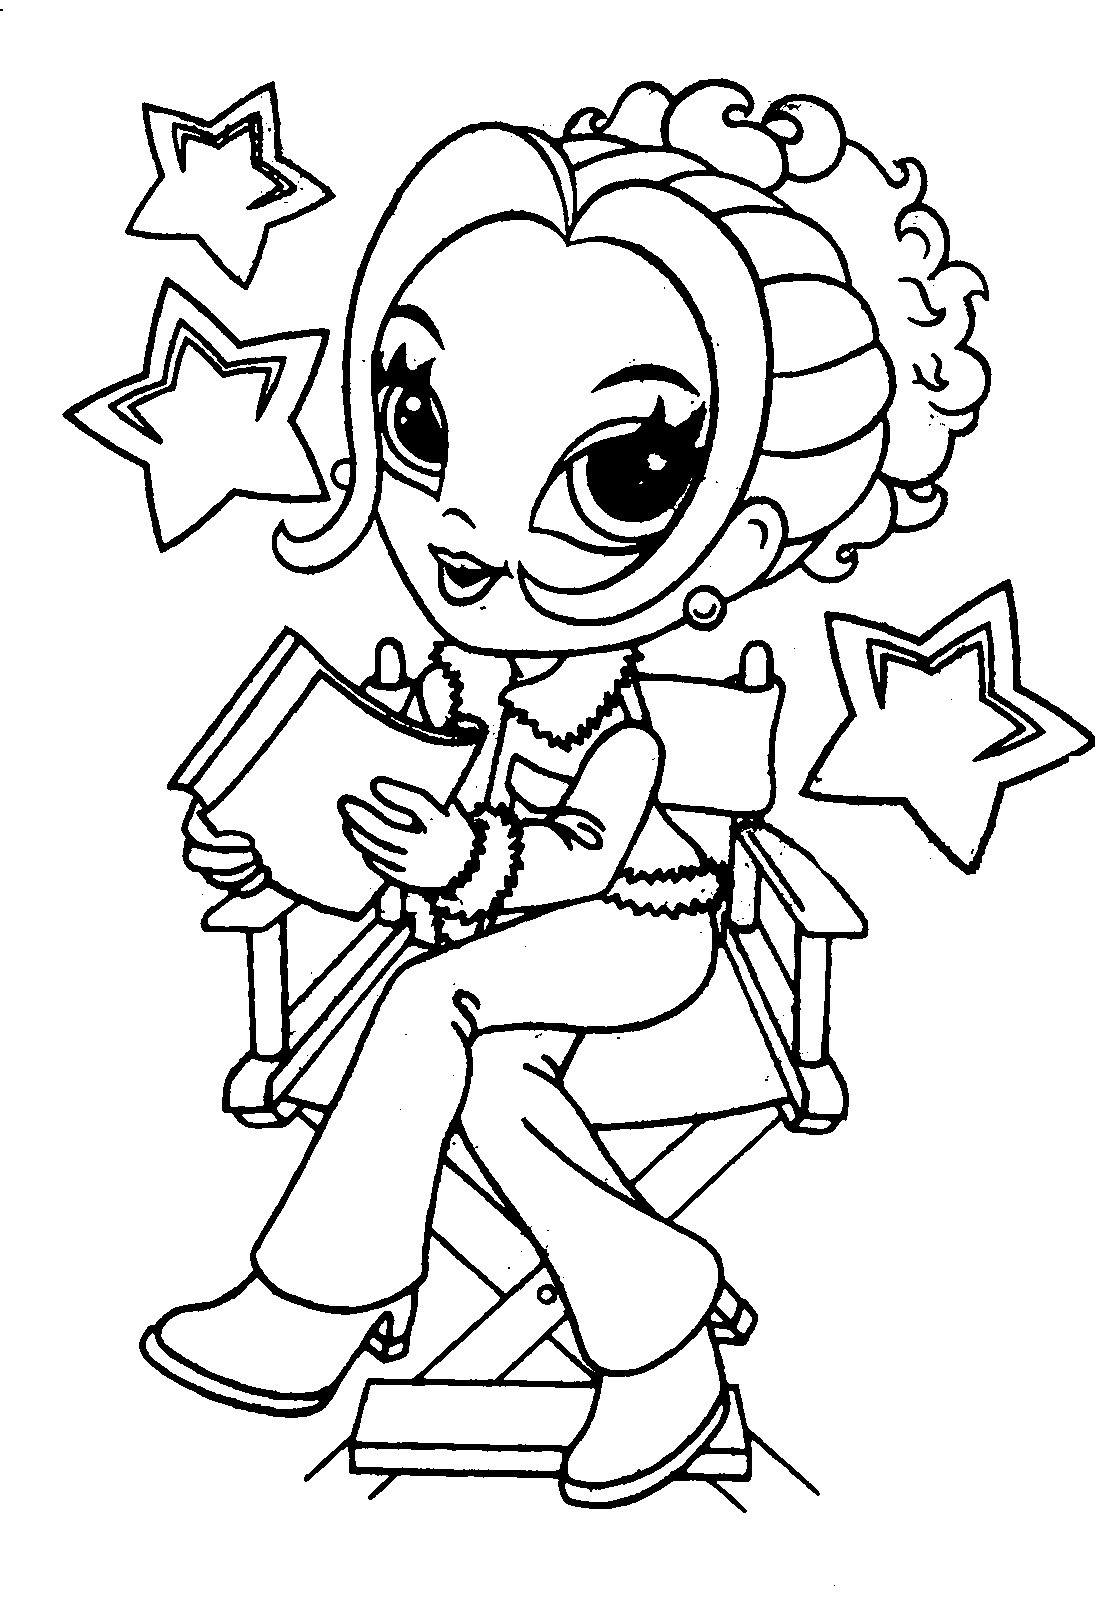 Coloring Pages For Middle School Students - Coloring Home